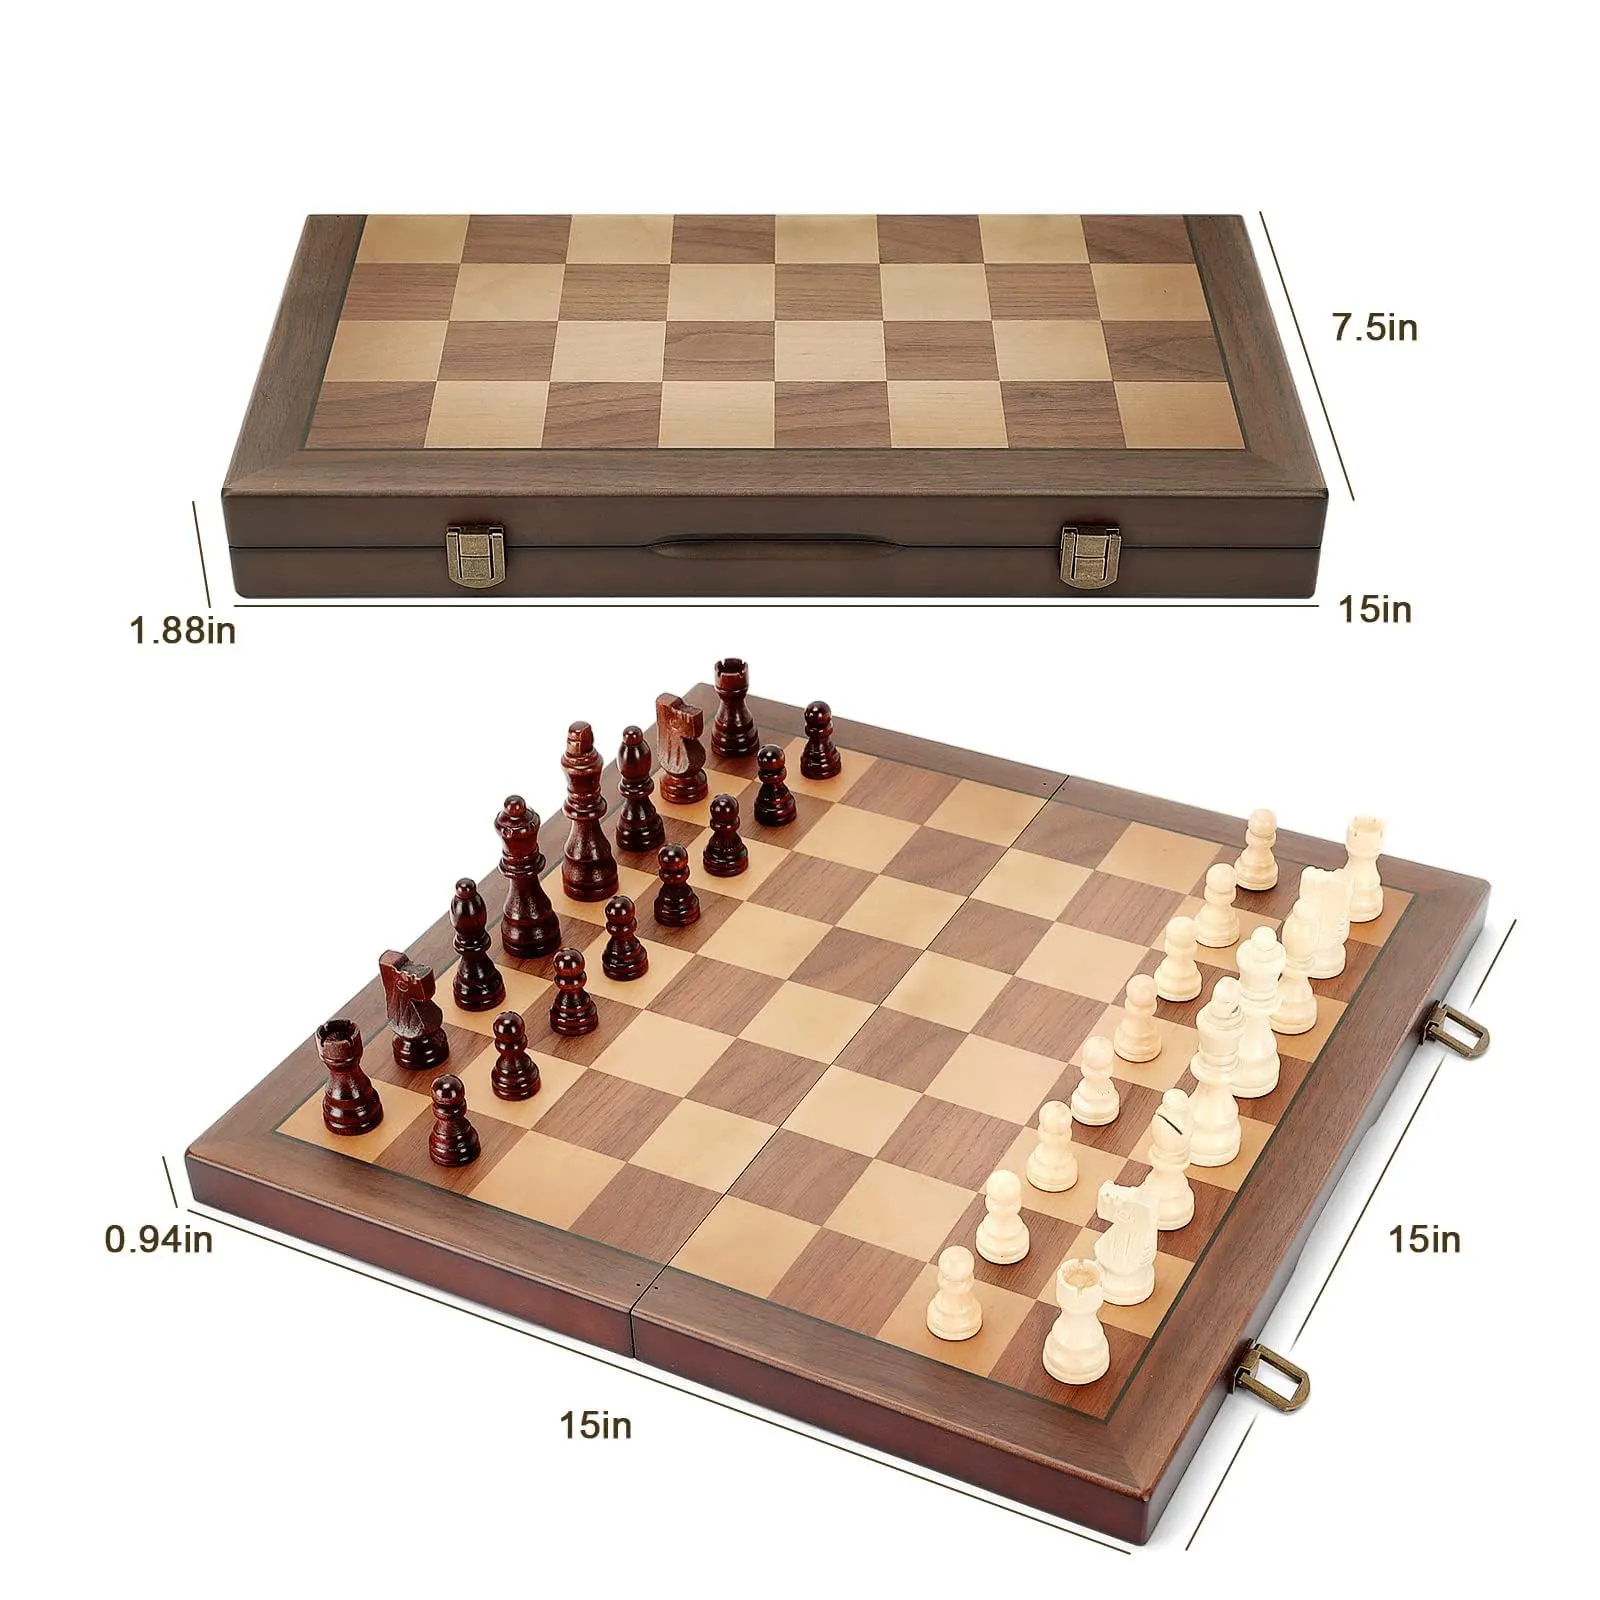 15 "Chess Magnetic Wooden Chess Board Set With Hand-Crafted Pieces  Folding Portable Travel Chess Match For Beginners